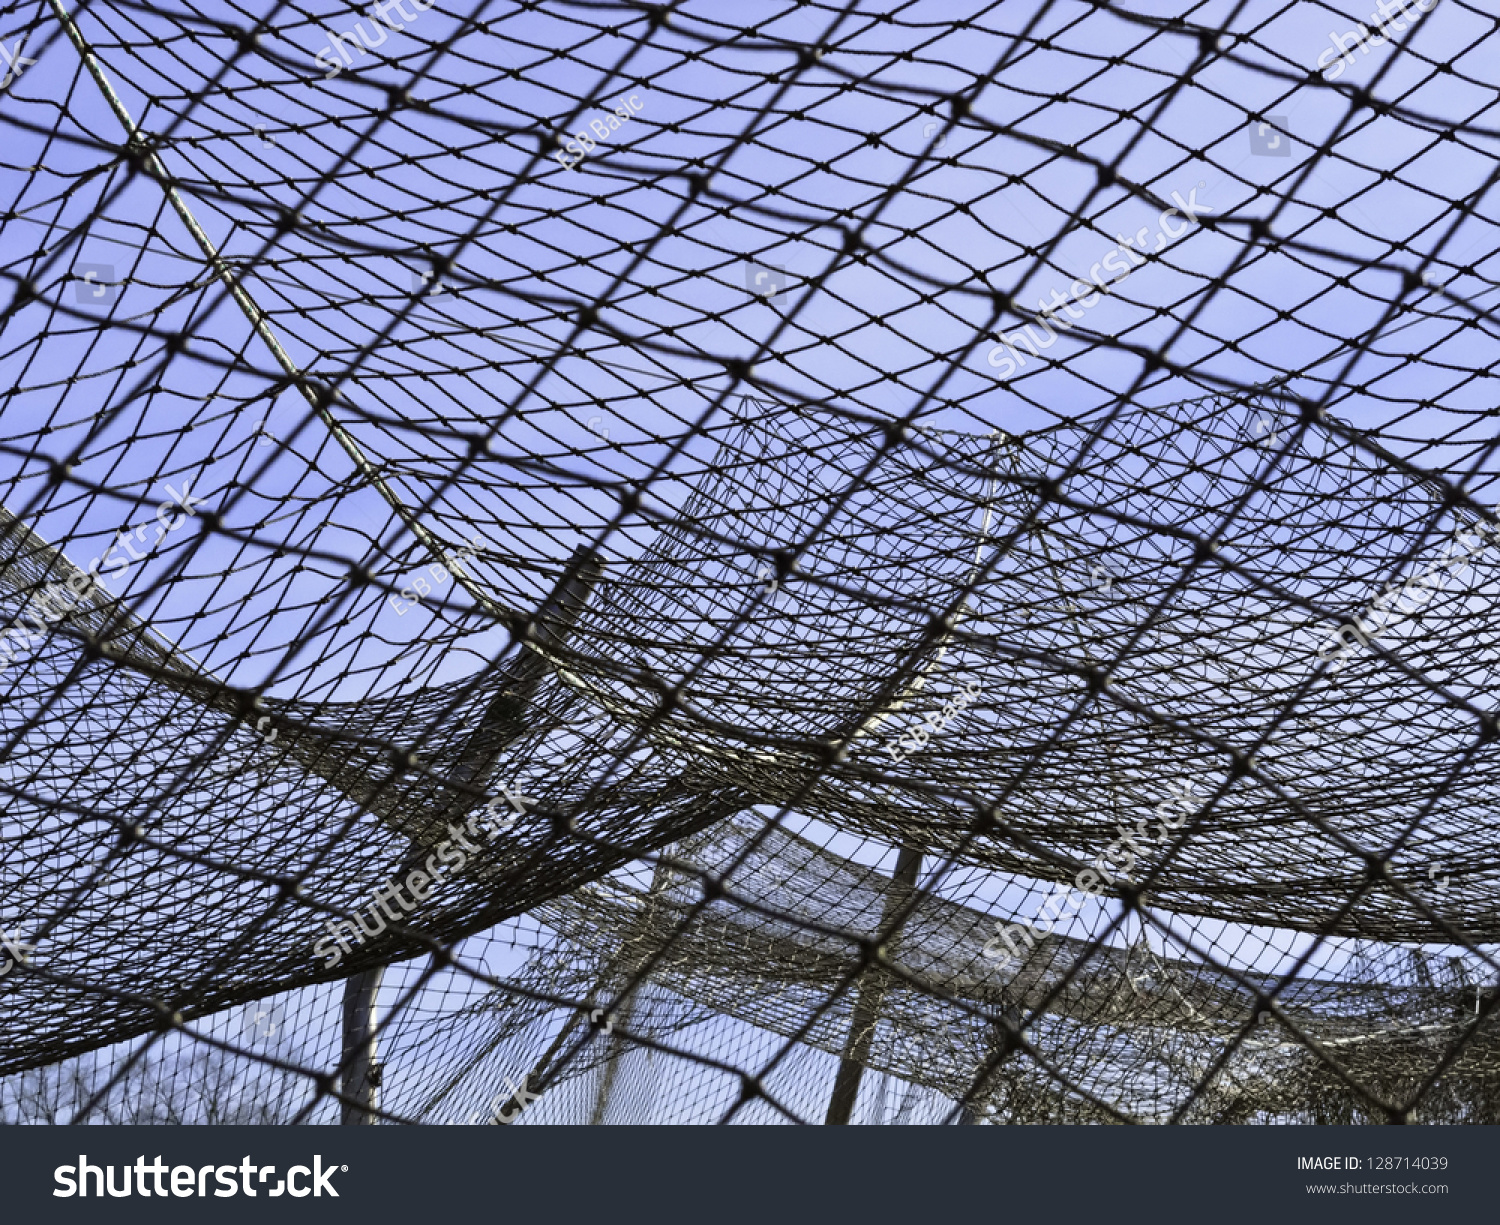 Complexities of practice: Part of netting over batting cage by baseball field on campus of community college #128714039